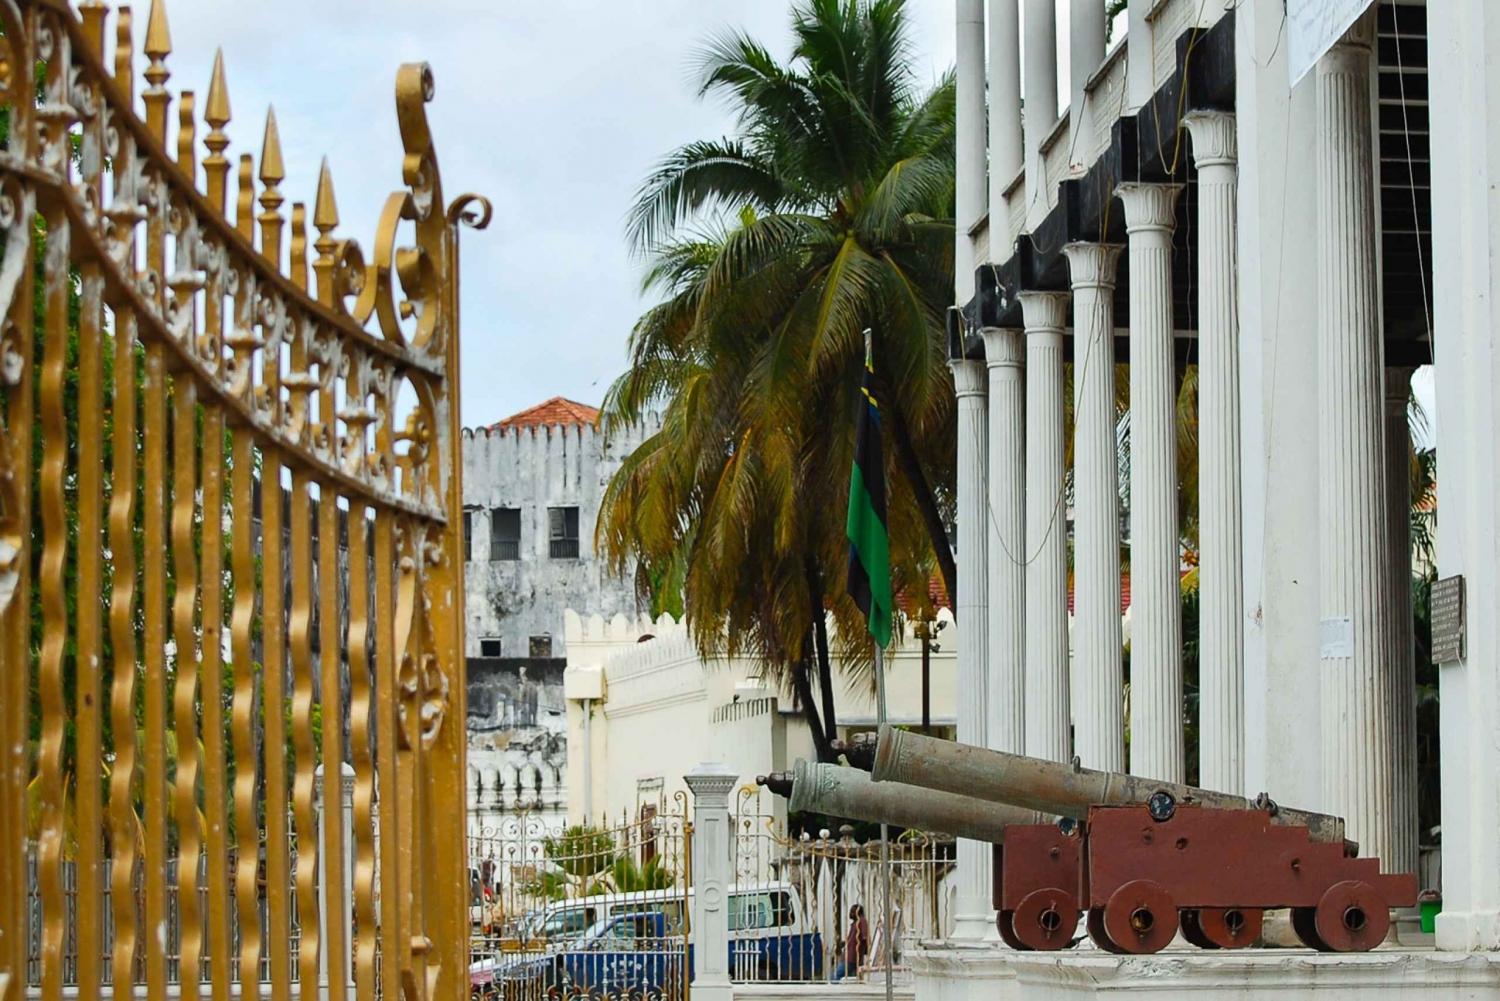 Zanzibar City: Guided Tour of the Stone Town District